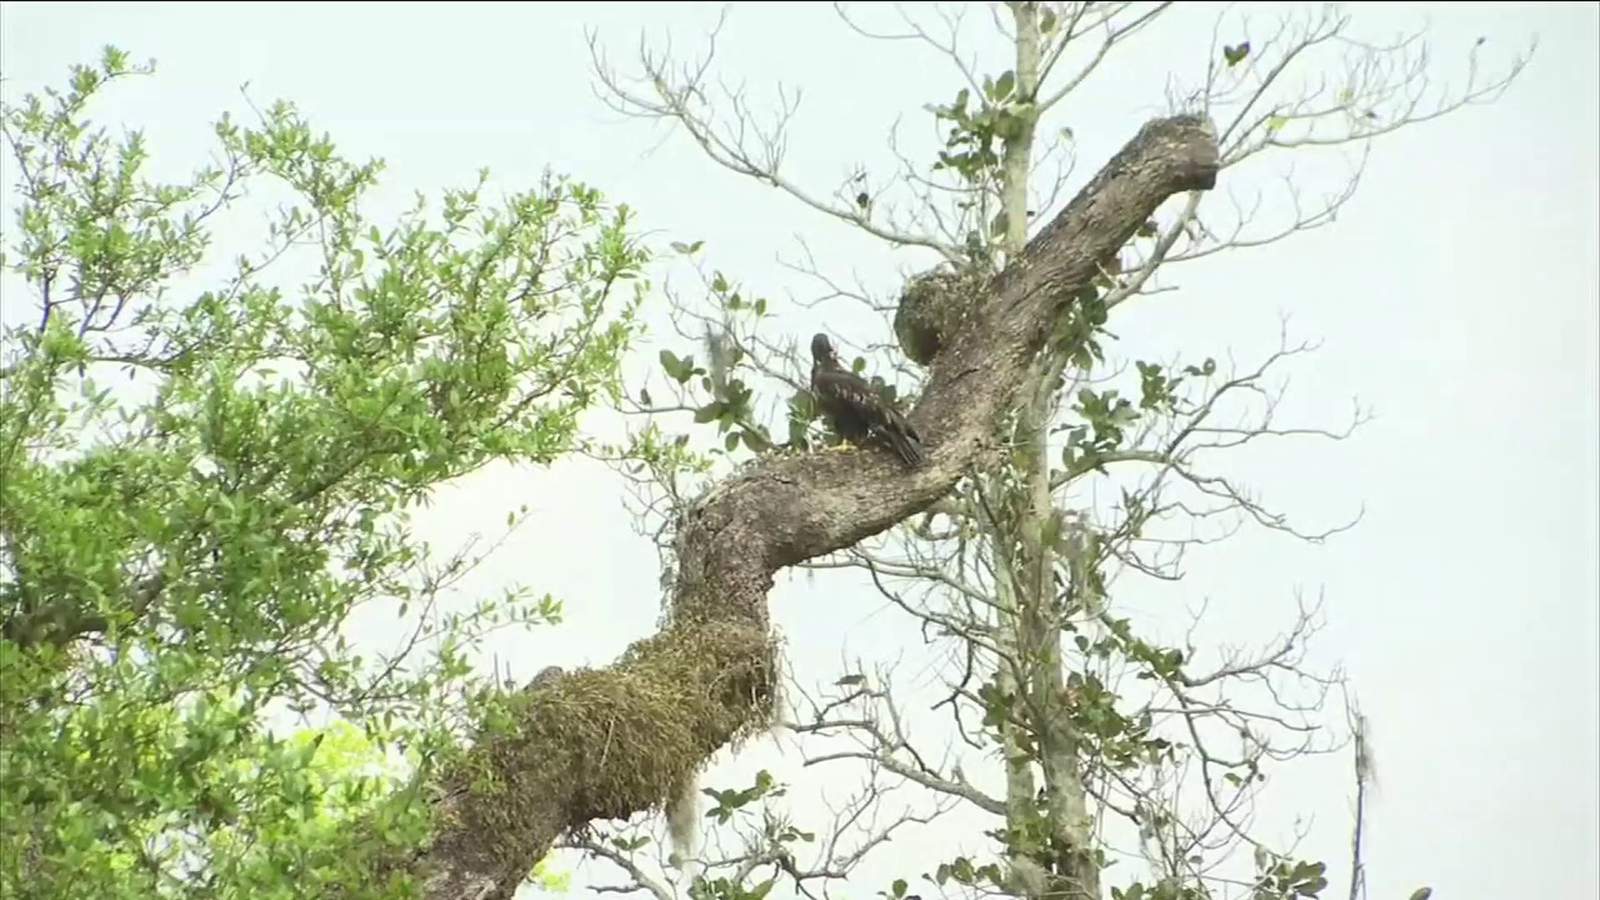 Eaglet finds new home at NAS Jax after falling out of nest